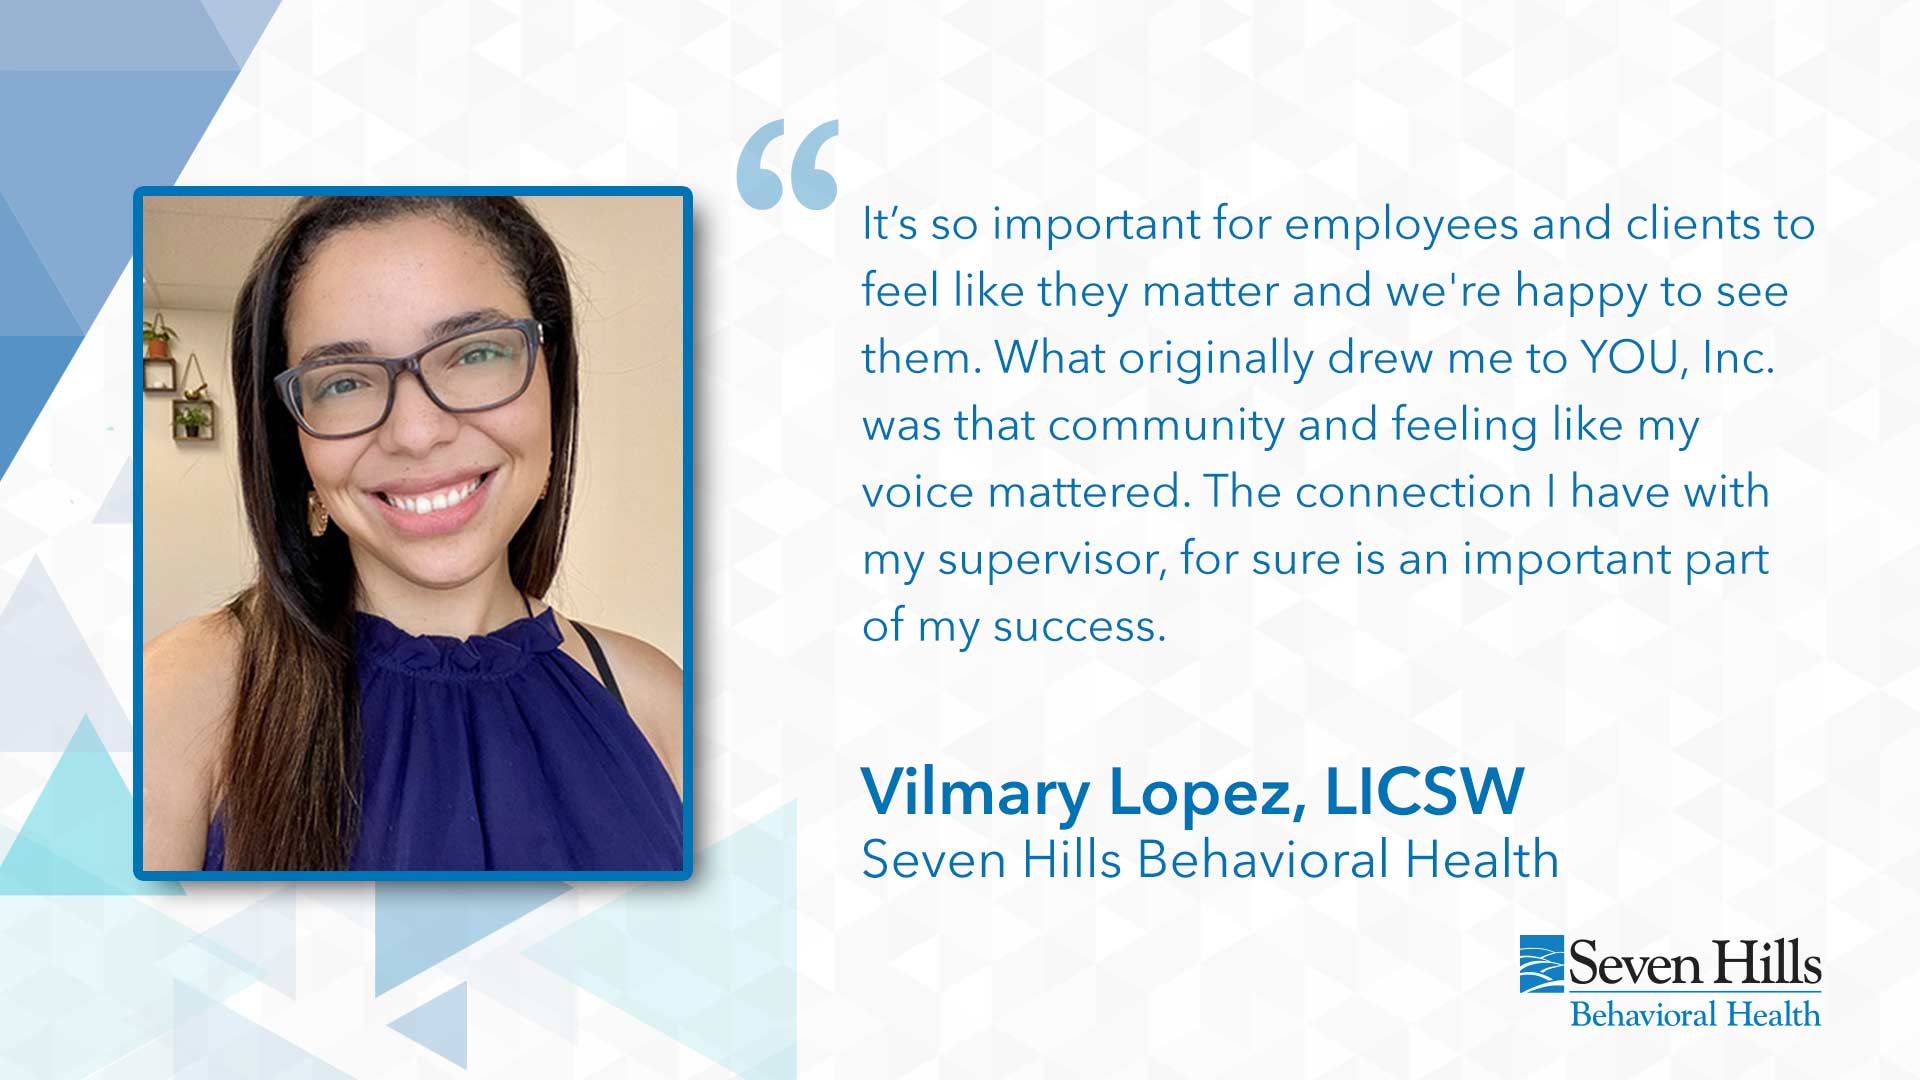 An Interview with Vilmary Lopez, LICSW, Seven Hills Behavioral Health